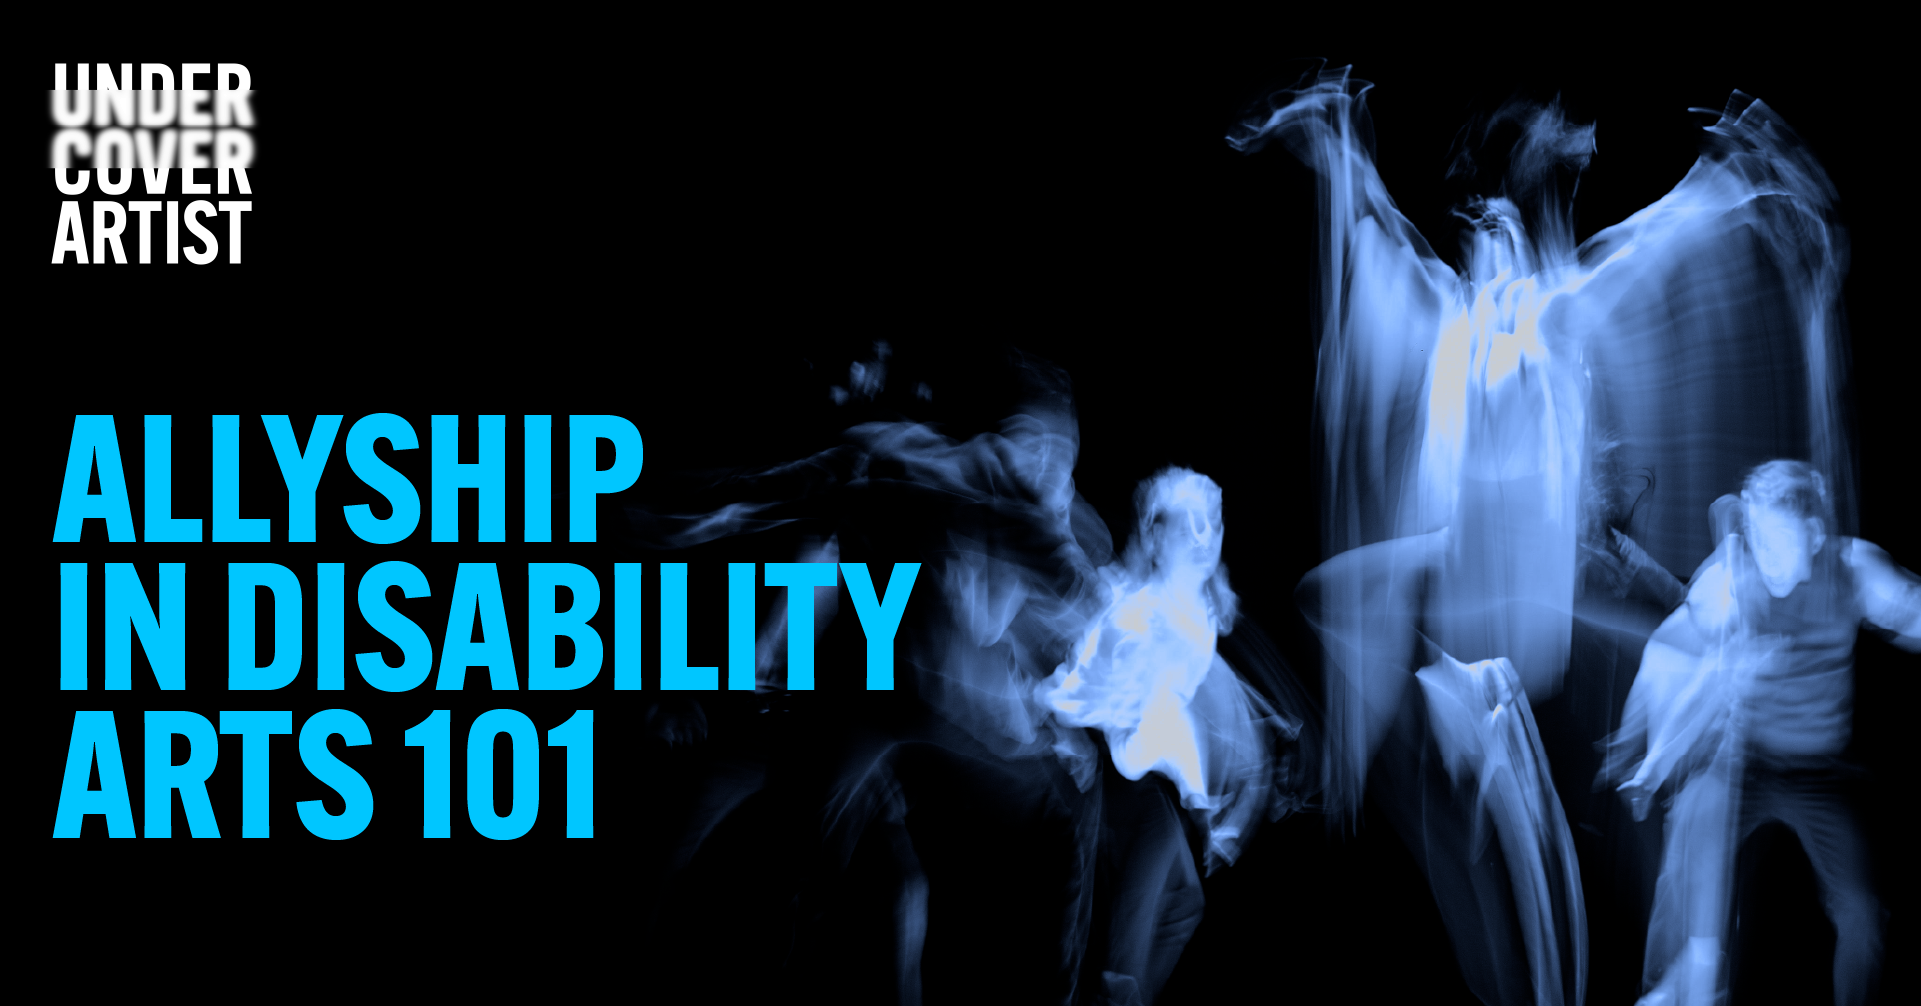 Allyship in Disability Arts 101 promotional tile with text and a blurred image of a people dancing